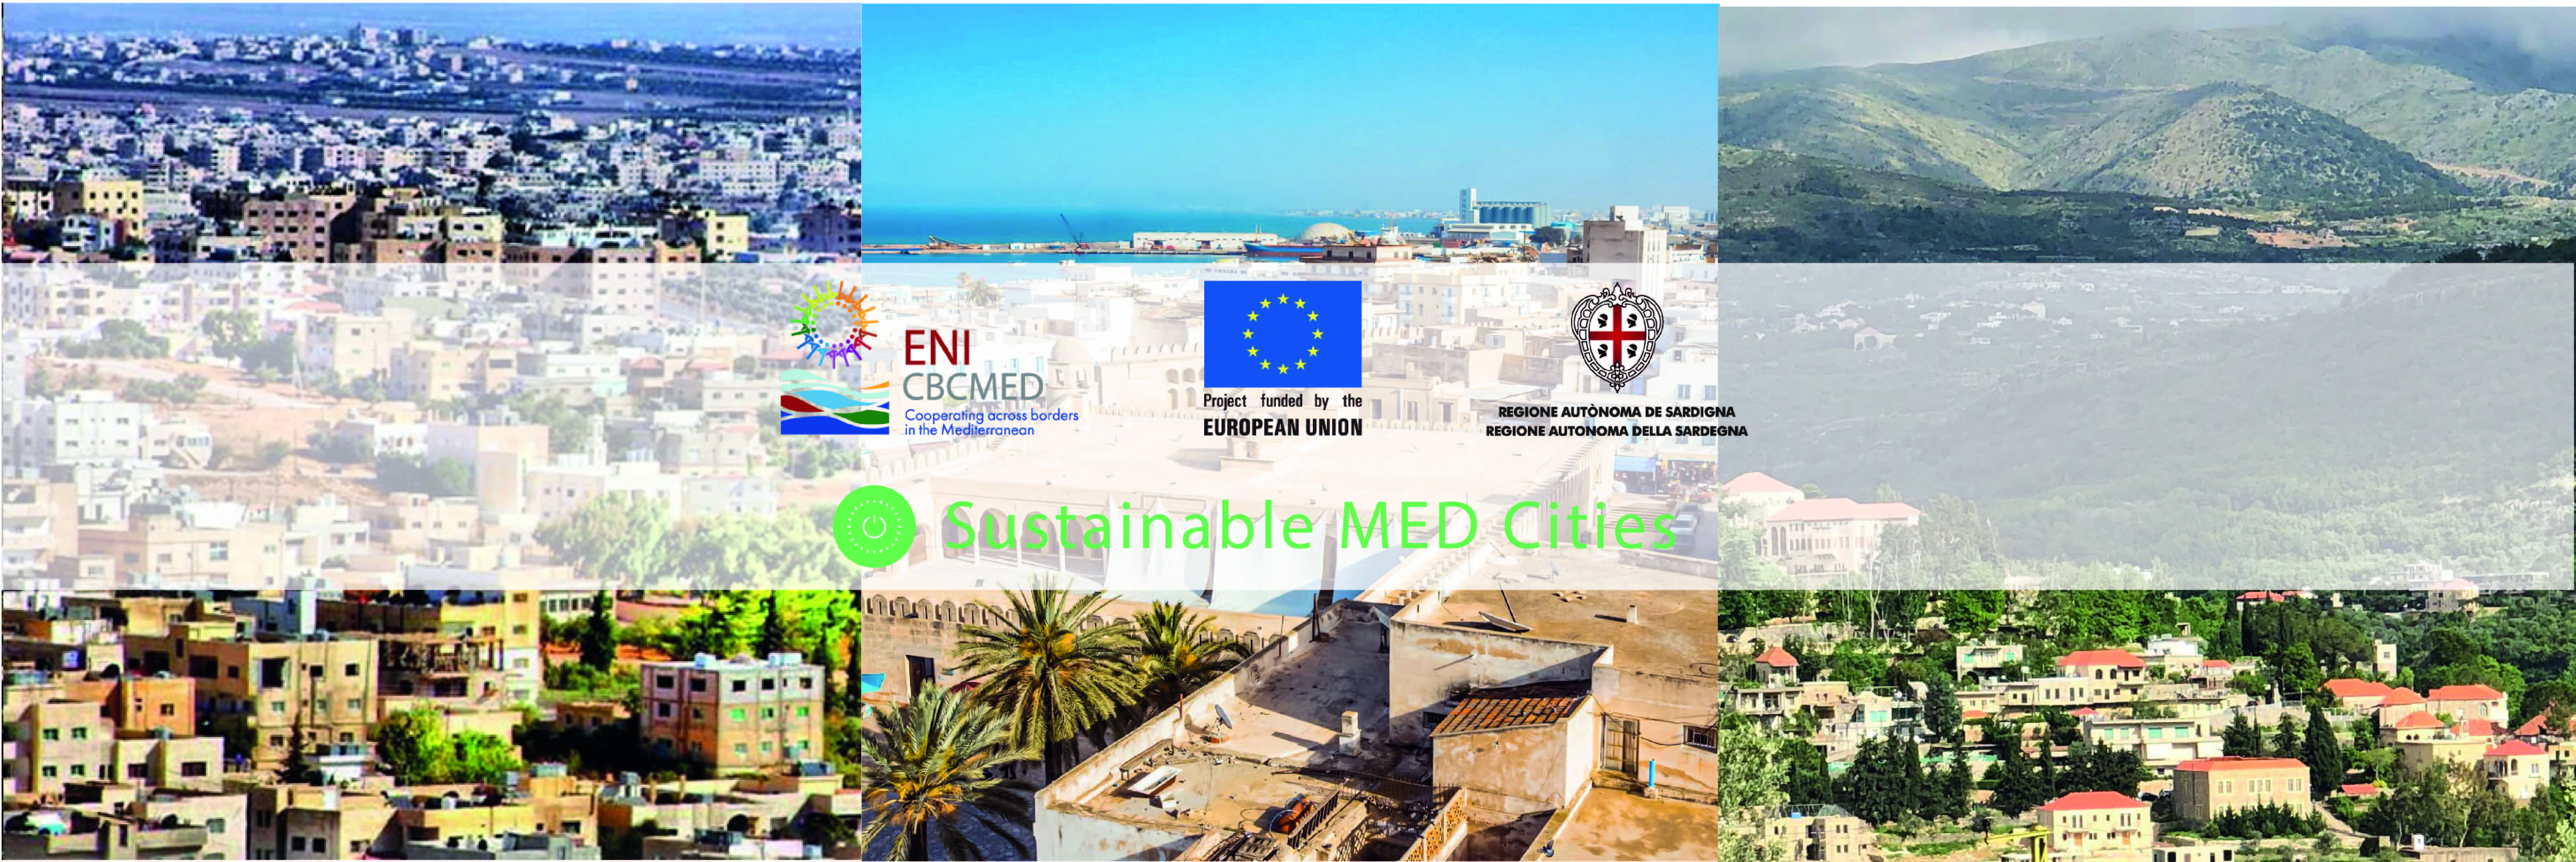 Sustainable MED Cities